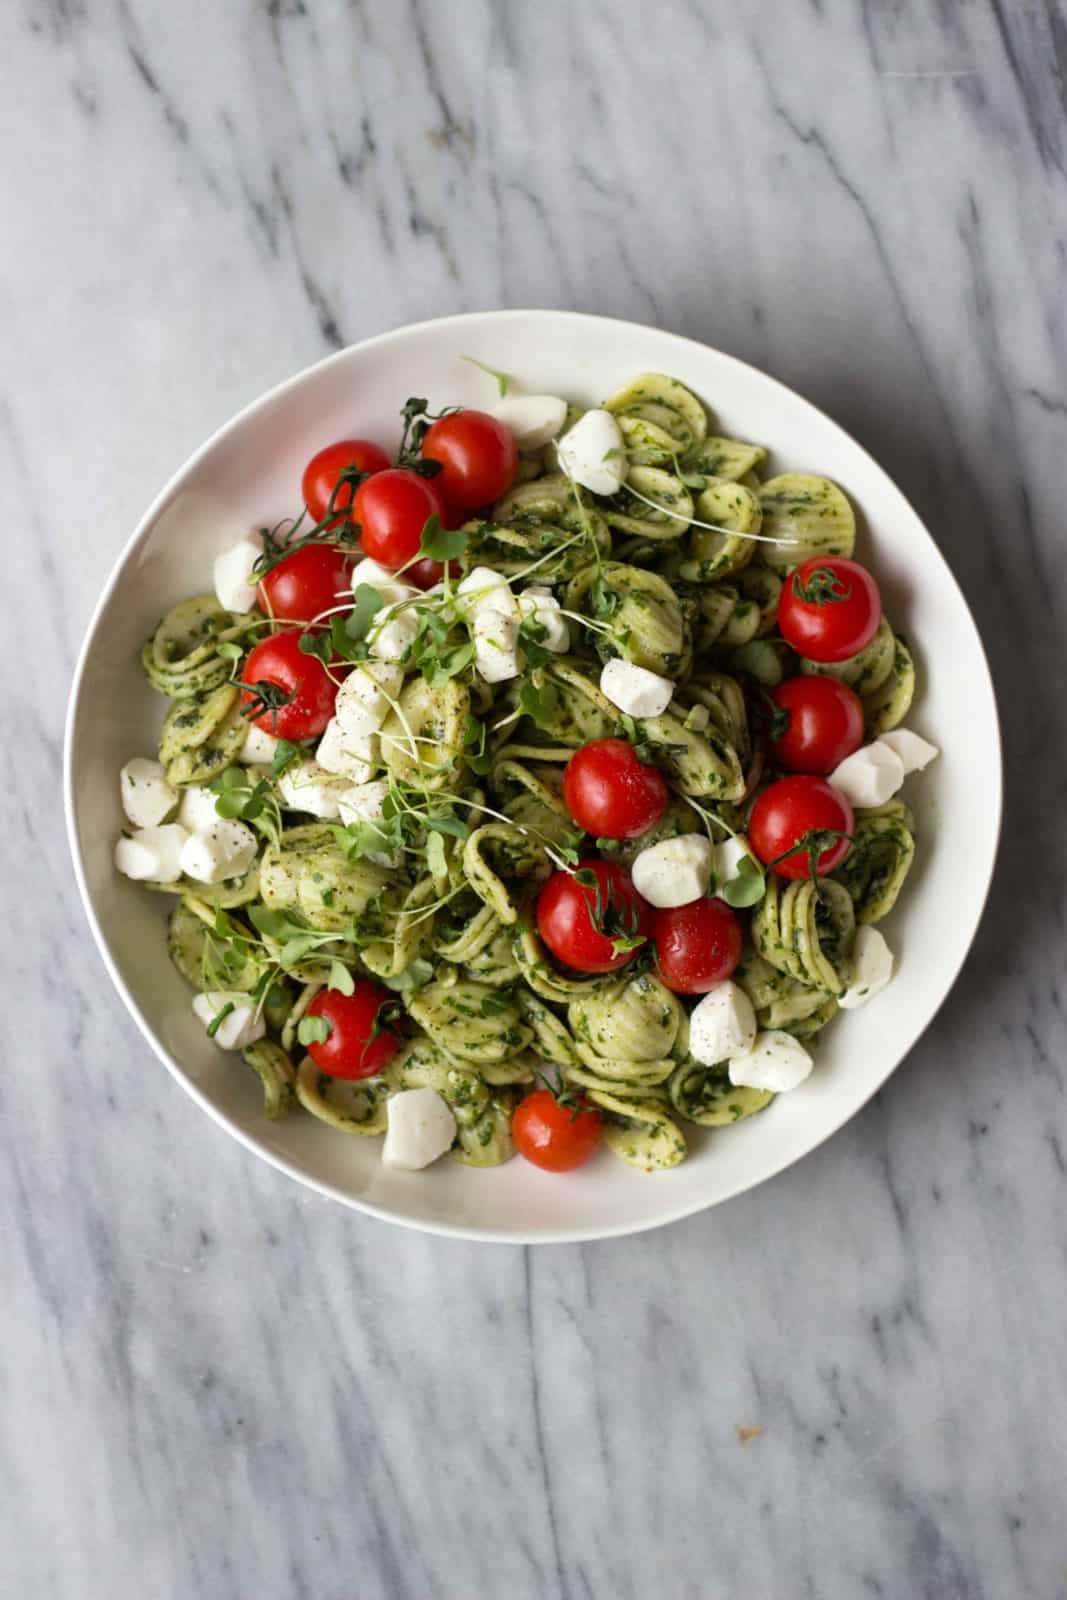 Caprese Pasta Salad made with pesto from leafy greens.